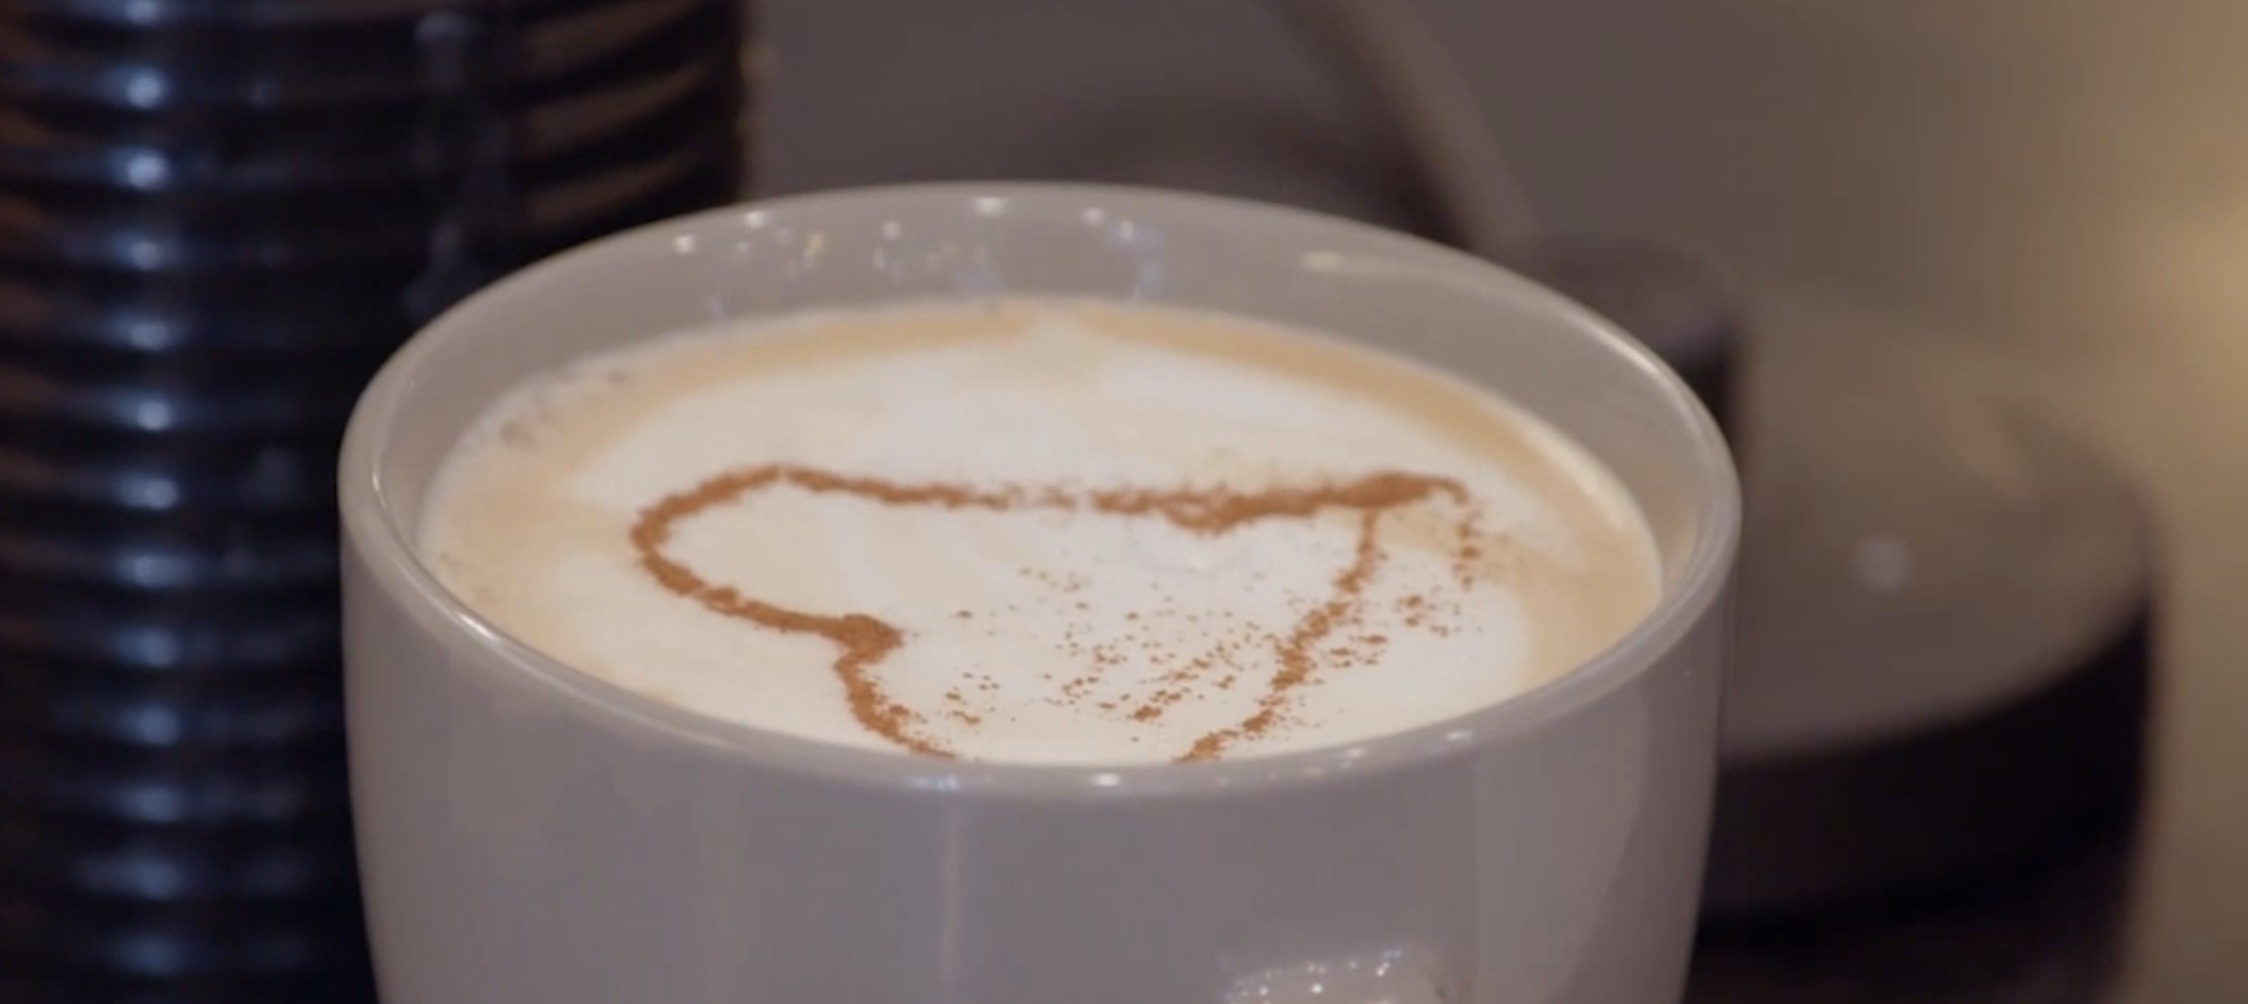 A close up of a mug filled with a latte with a cinnamon heart on top